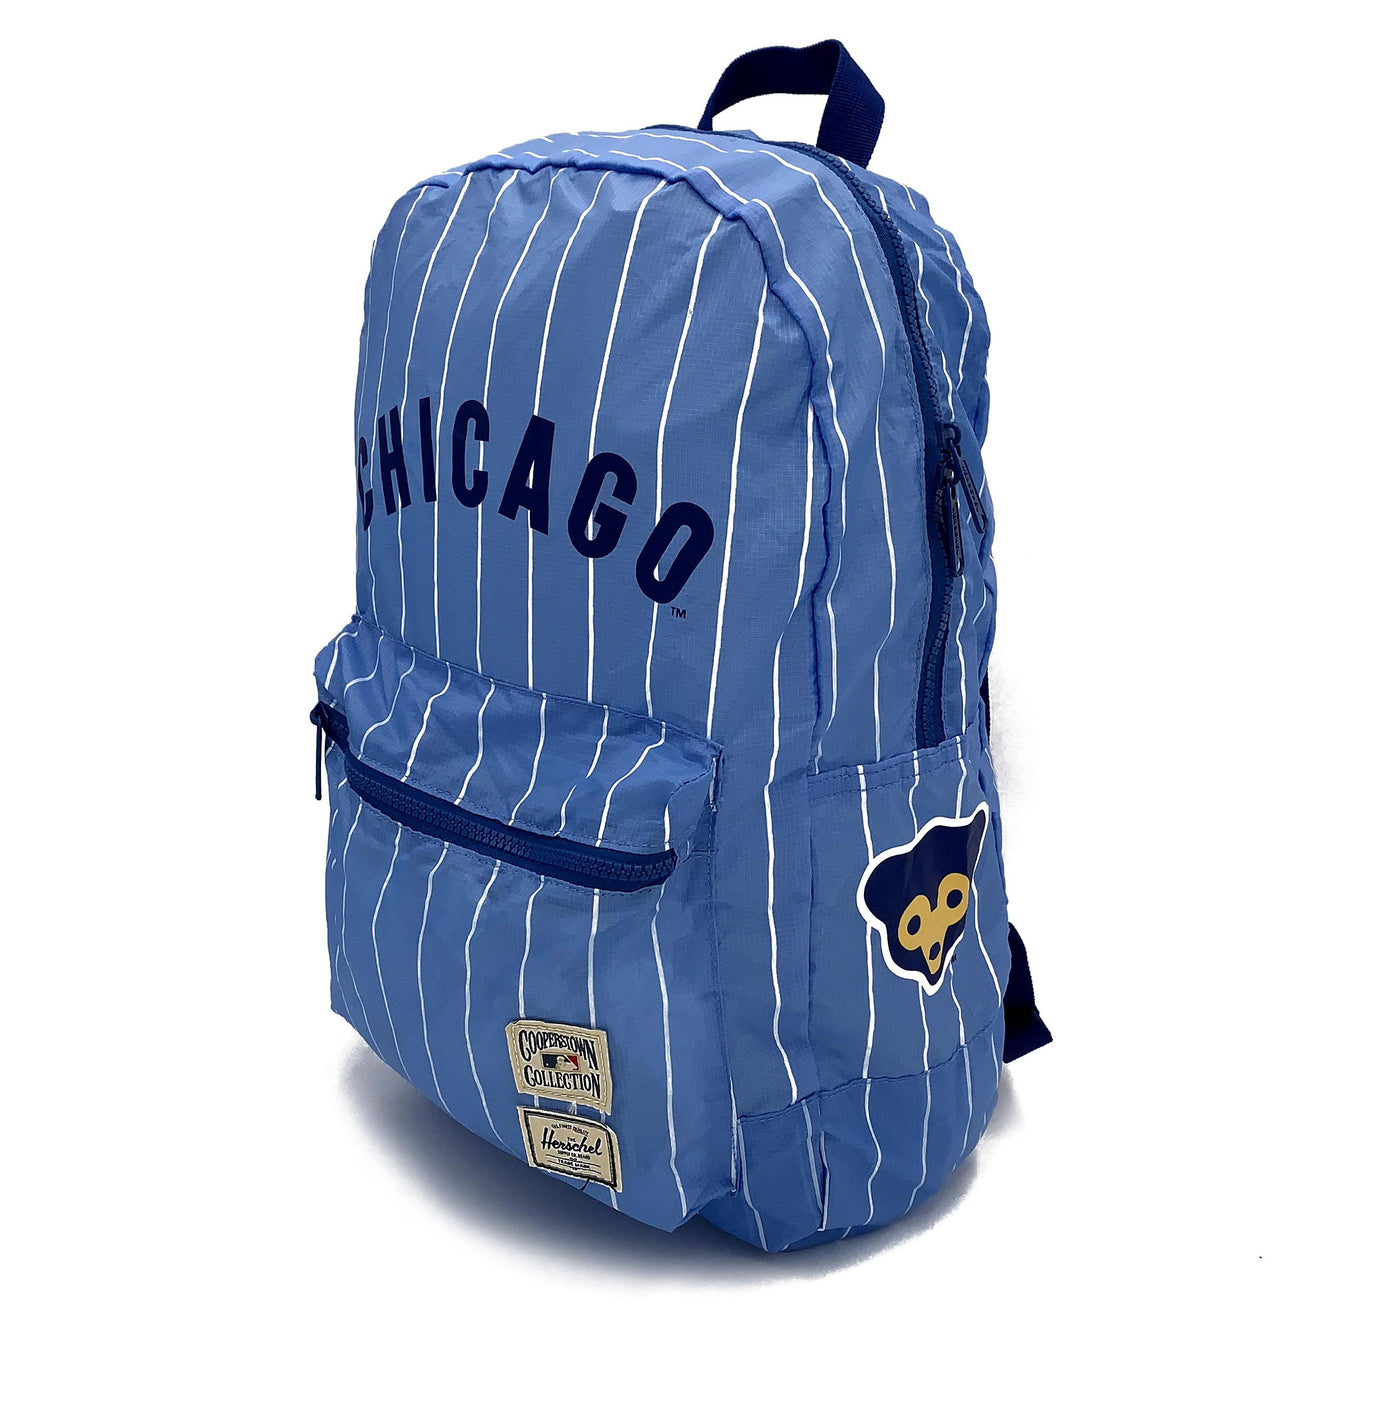 PINSTRIPE PACKABLE CHICAGO CUBS DAYPACK - Ivy Shop